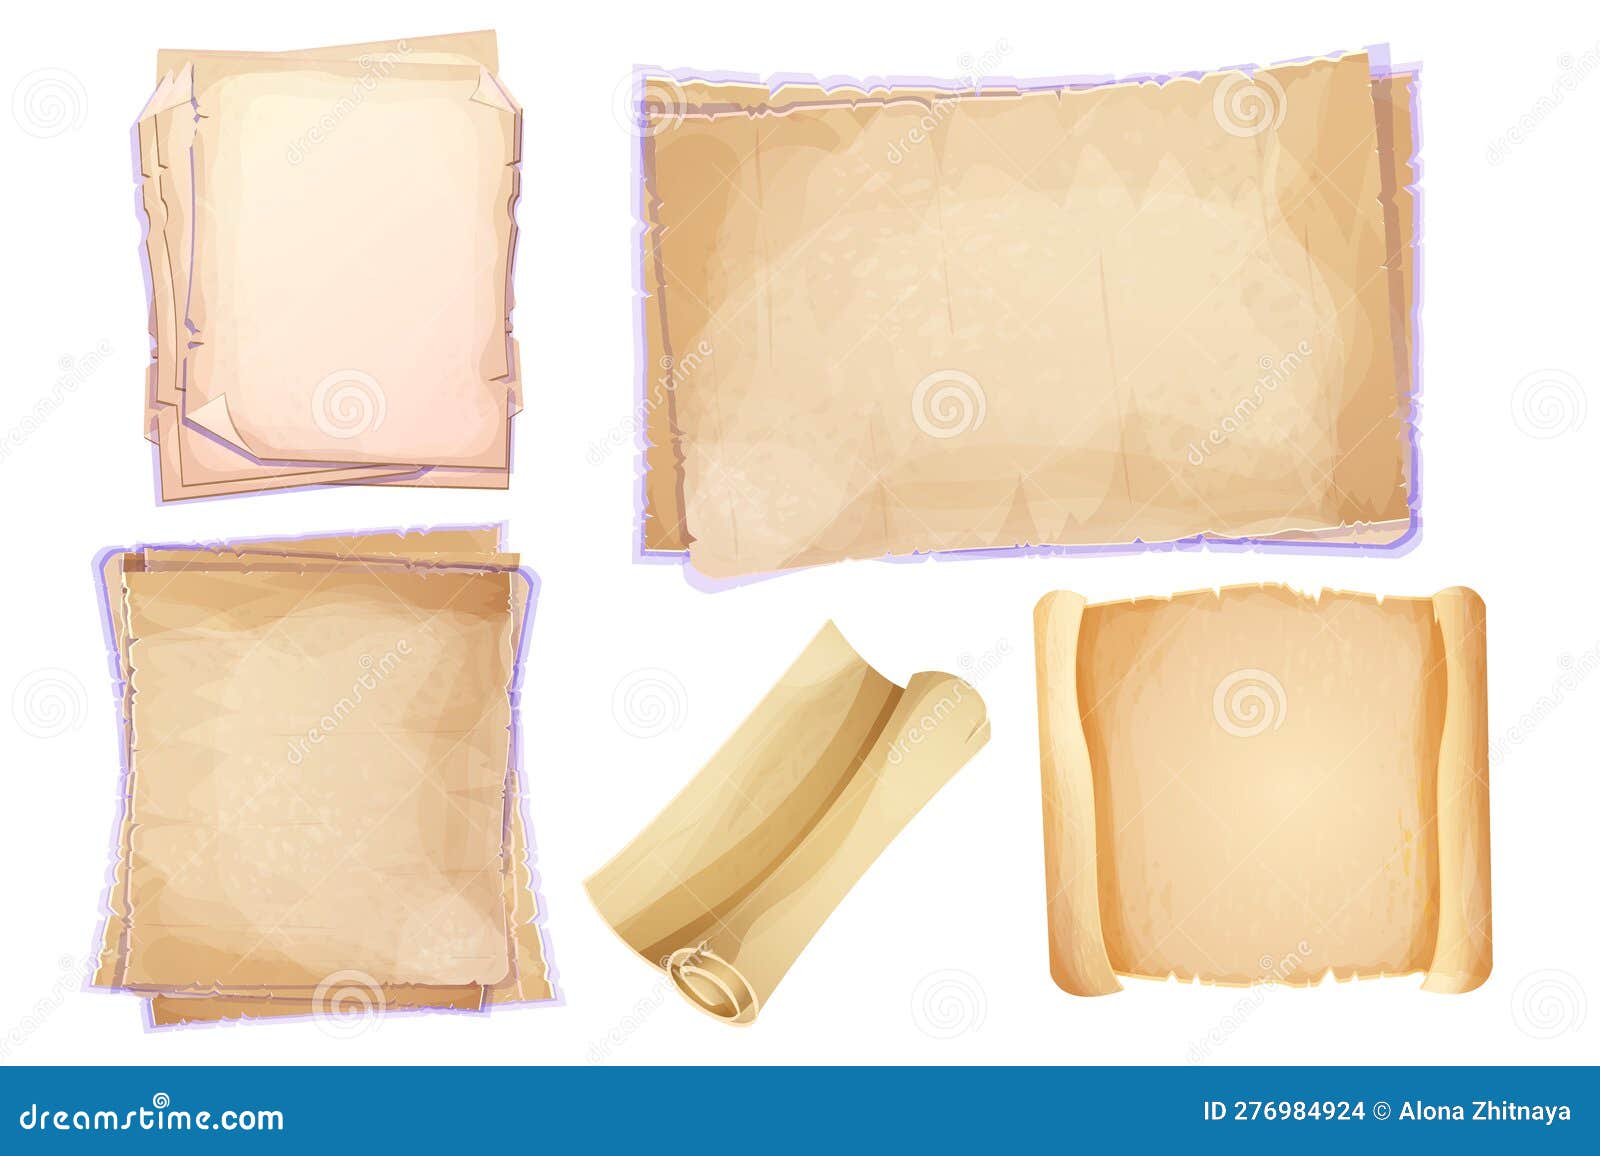 https://thumbs.dreamstime.com/z/set-parchment-scroll-papyrus-antique-paper-blank-cartoon-style-isolated-white-background-fairy-fantasy-element-set-parchment-276984924.jpg